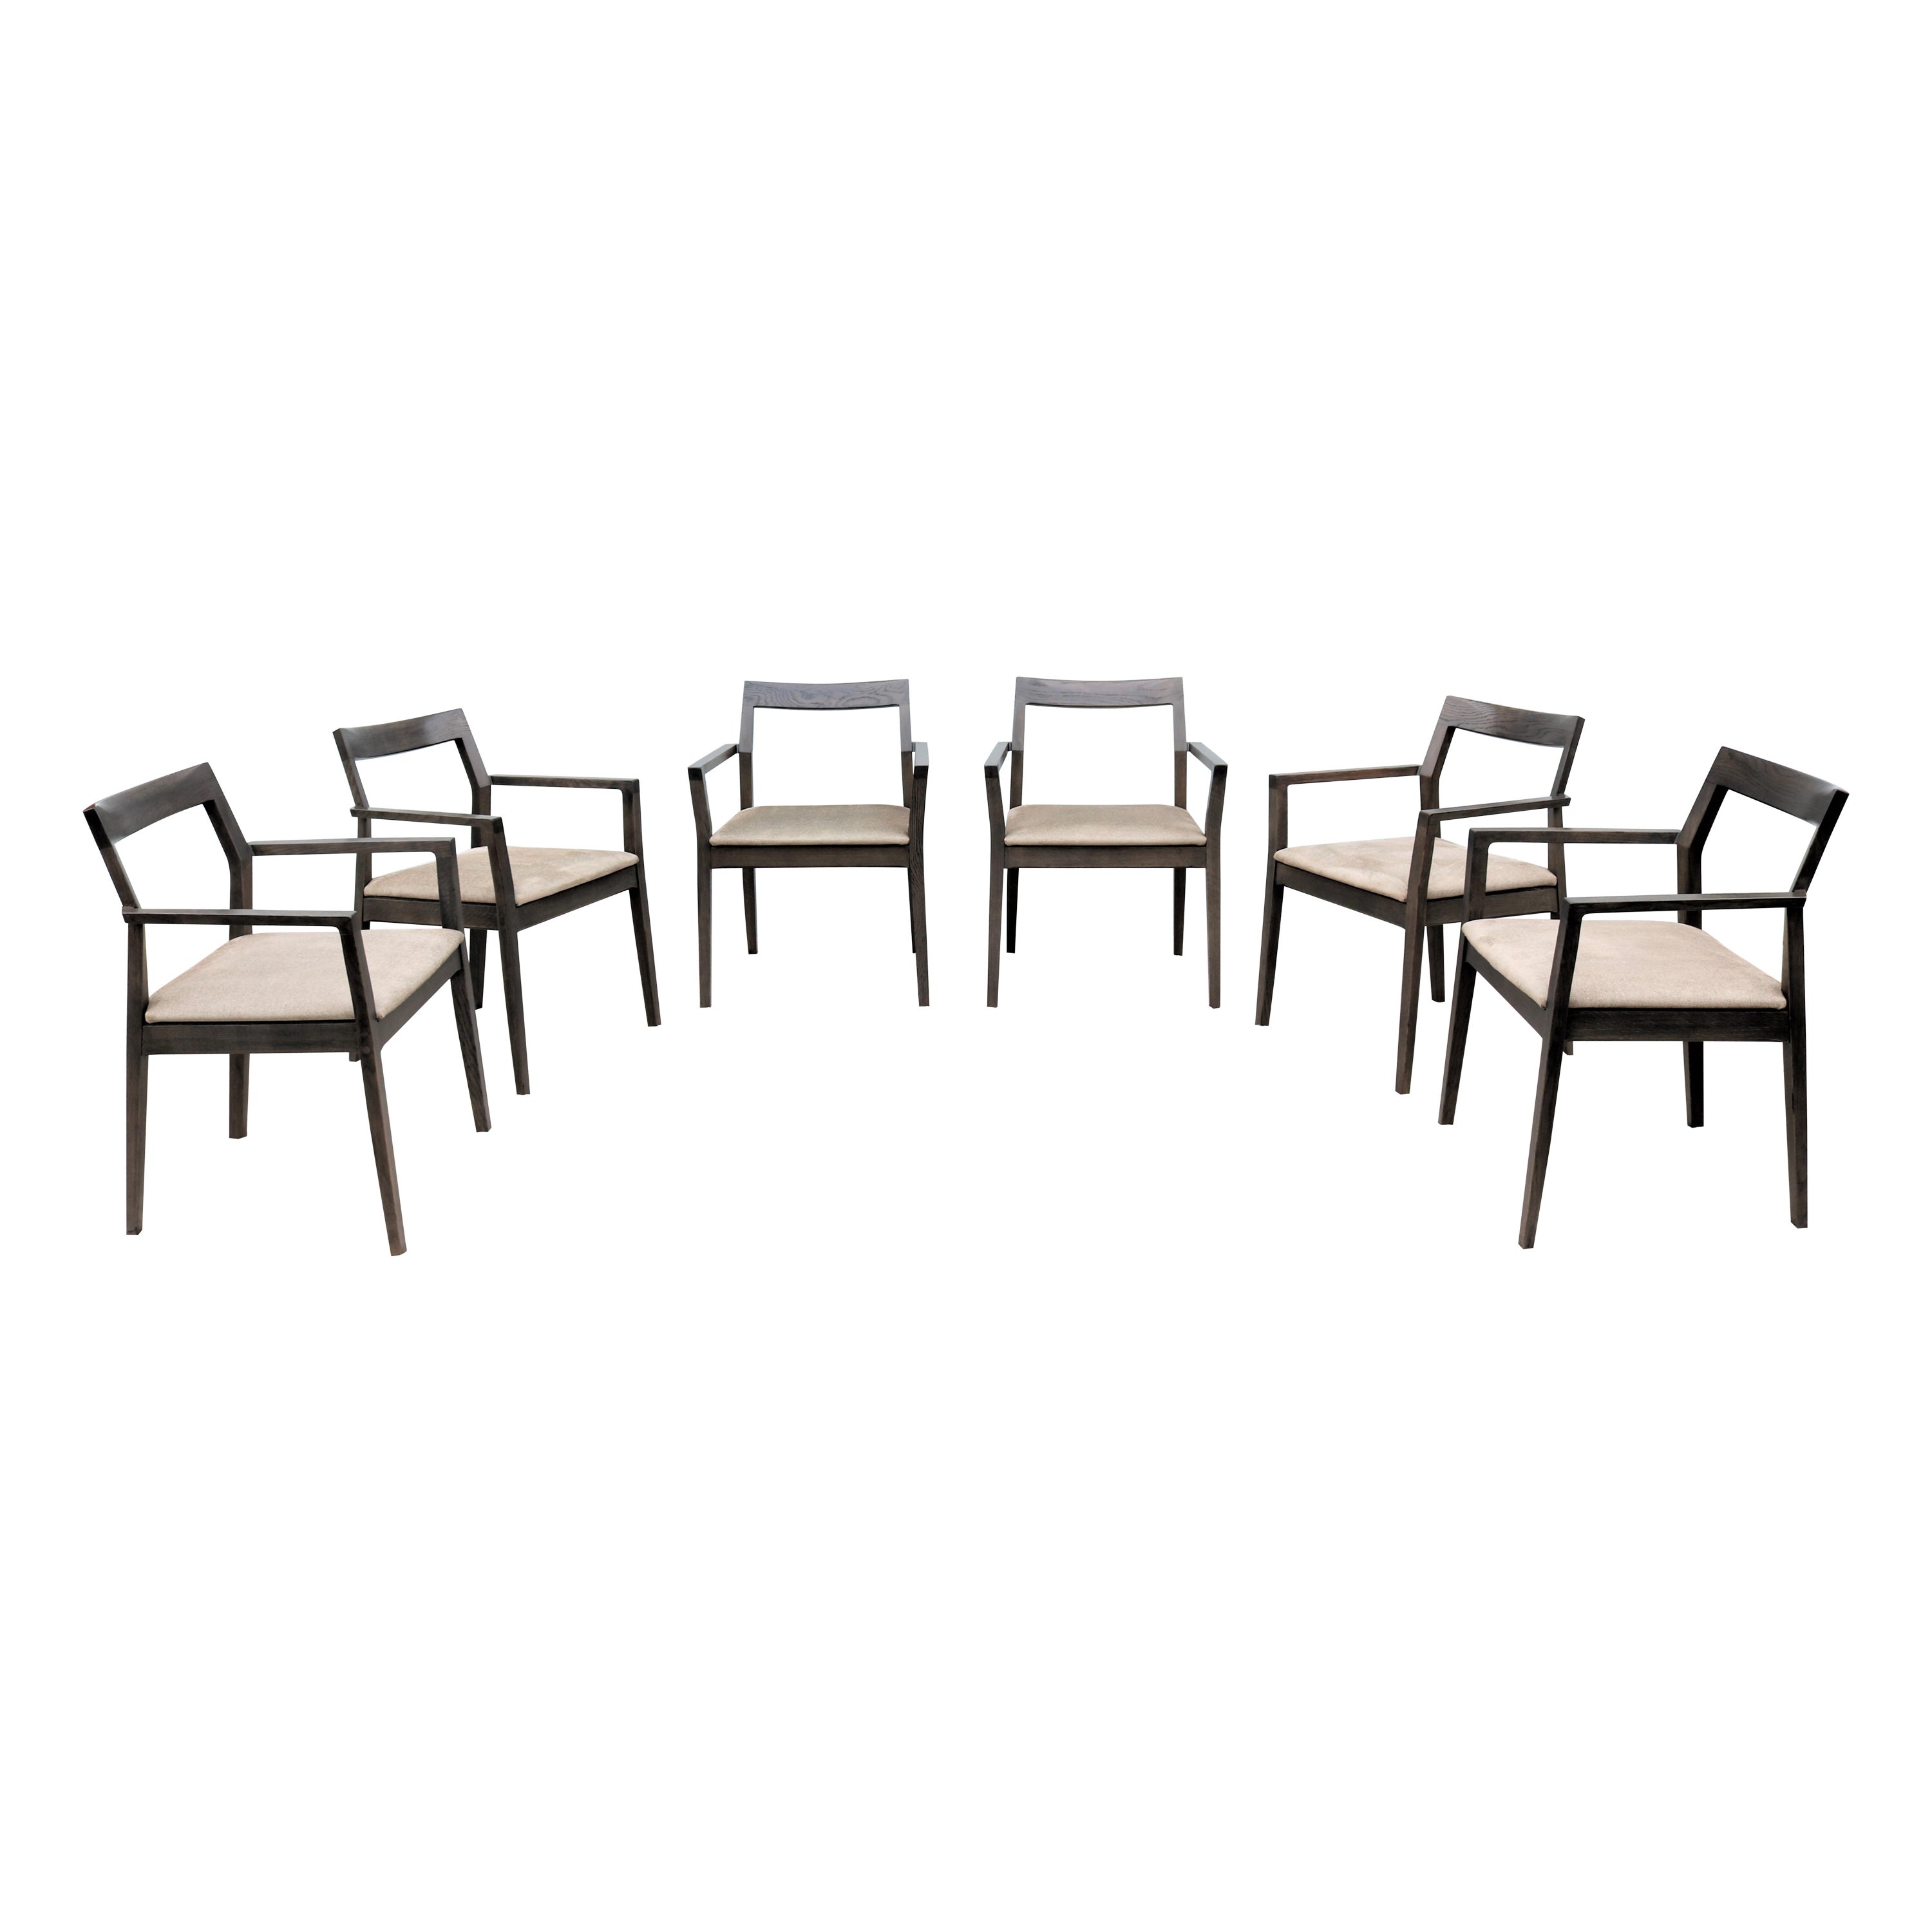 Contemporary Marc Krusin for Knoll Krusin Wood Side Dining Armchair, Set of 6